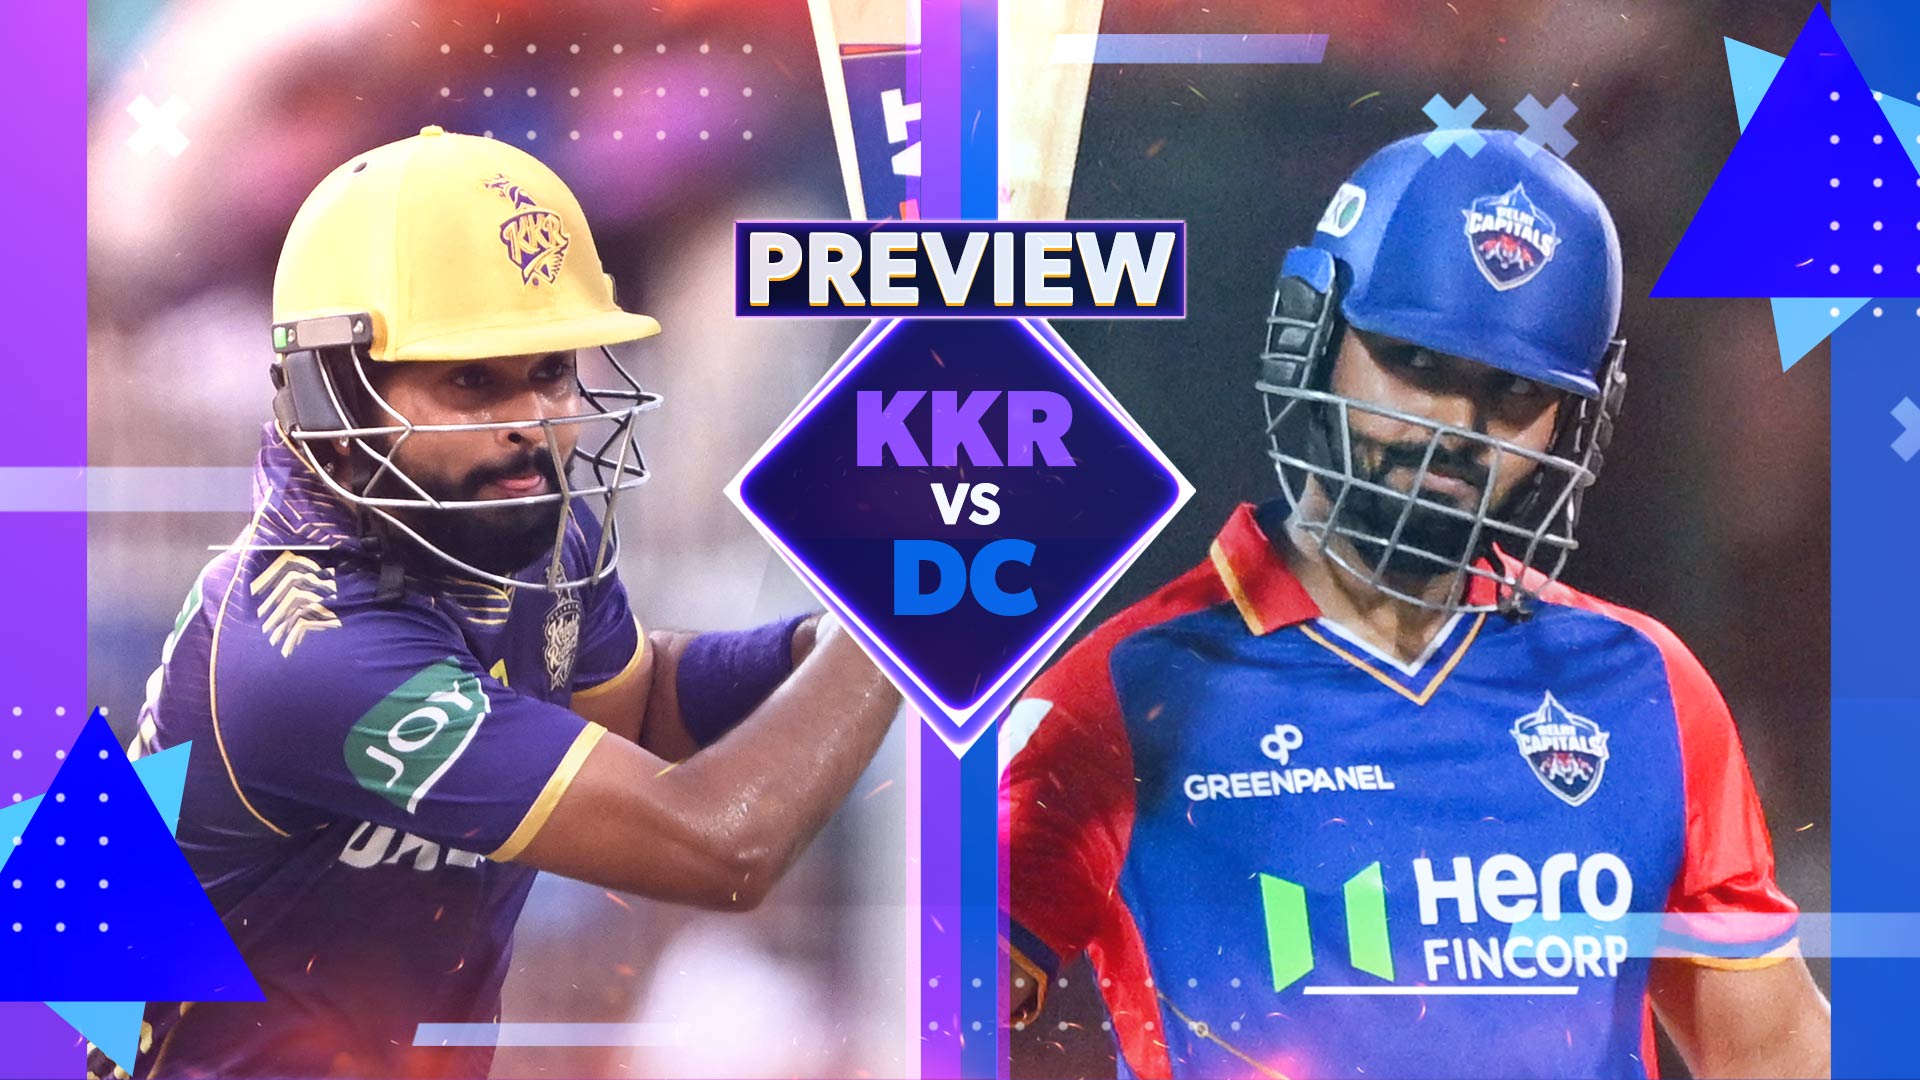 KKR vs DC: All You Need to Know